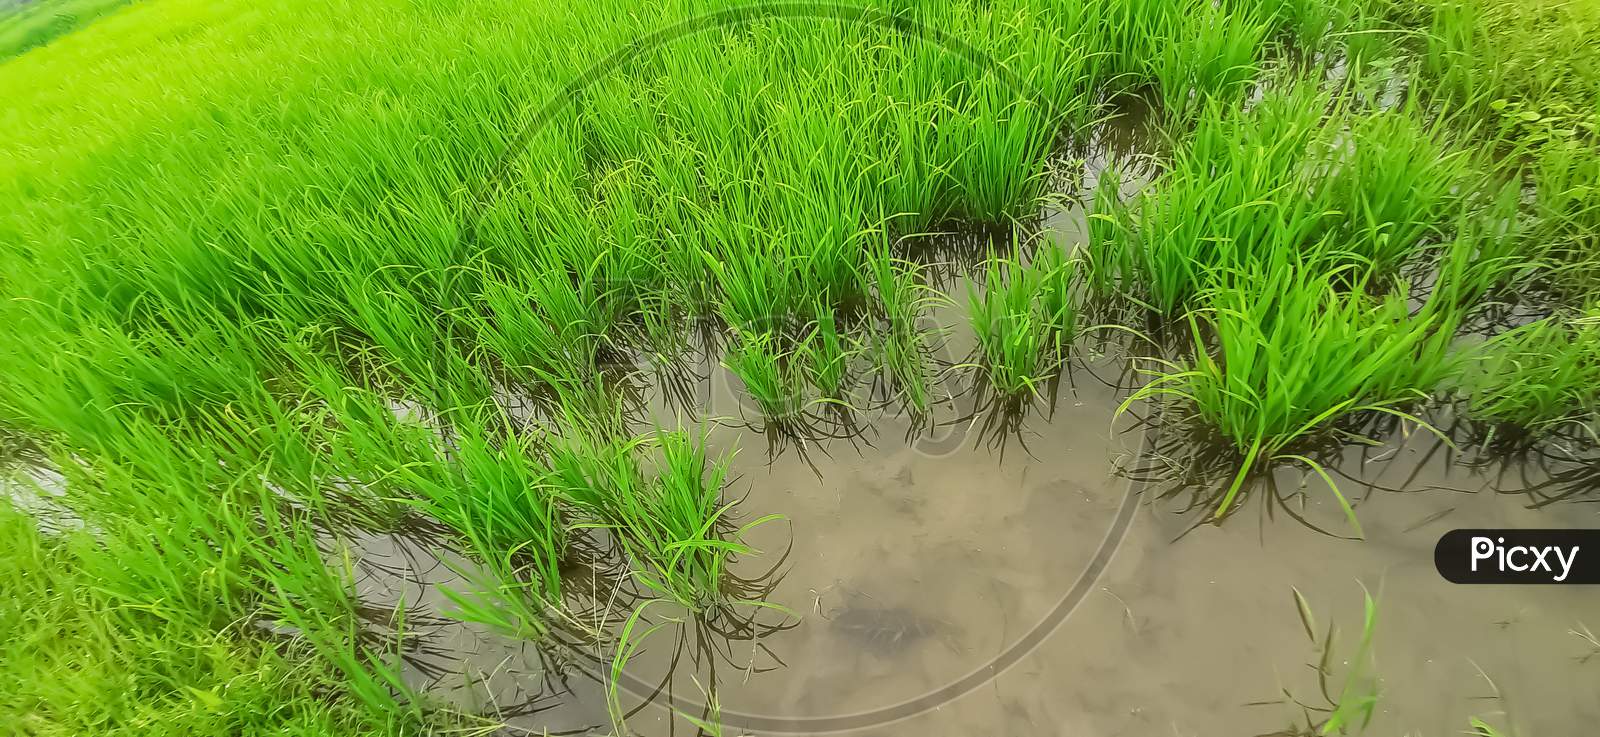 Paddy agriculture field